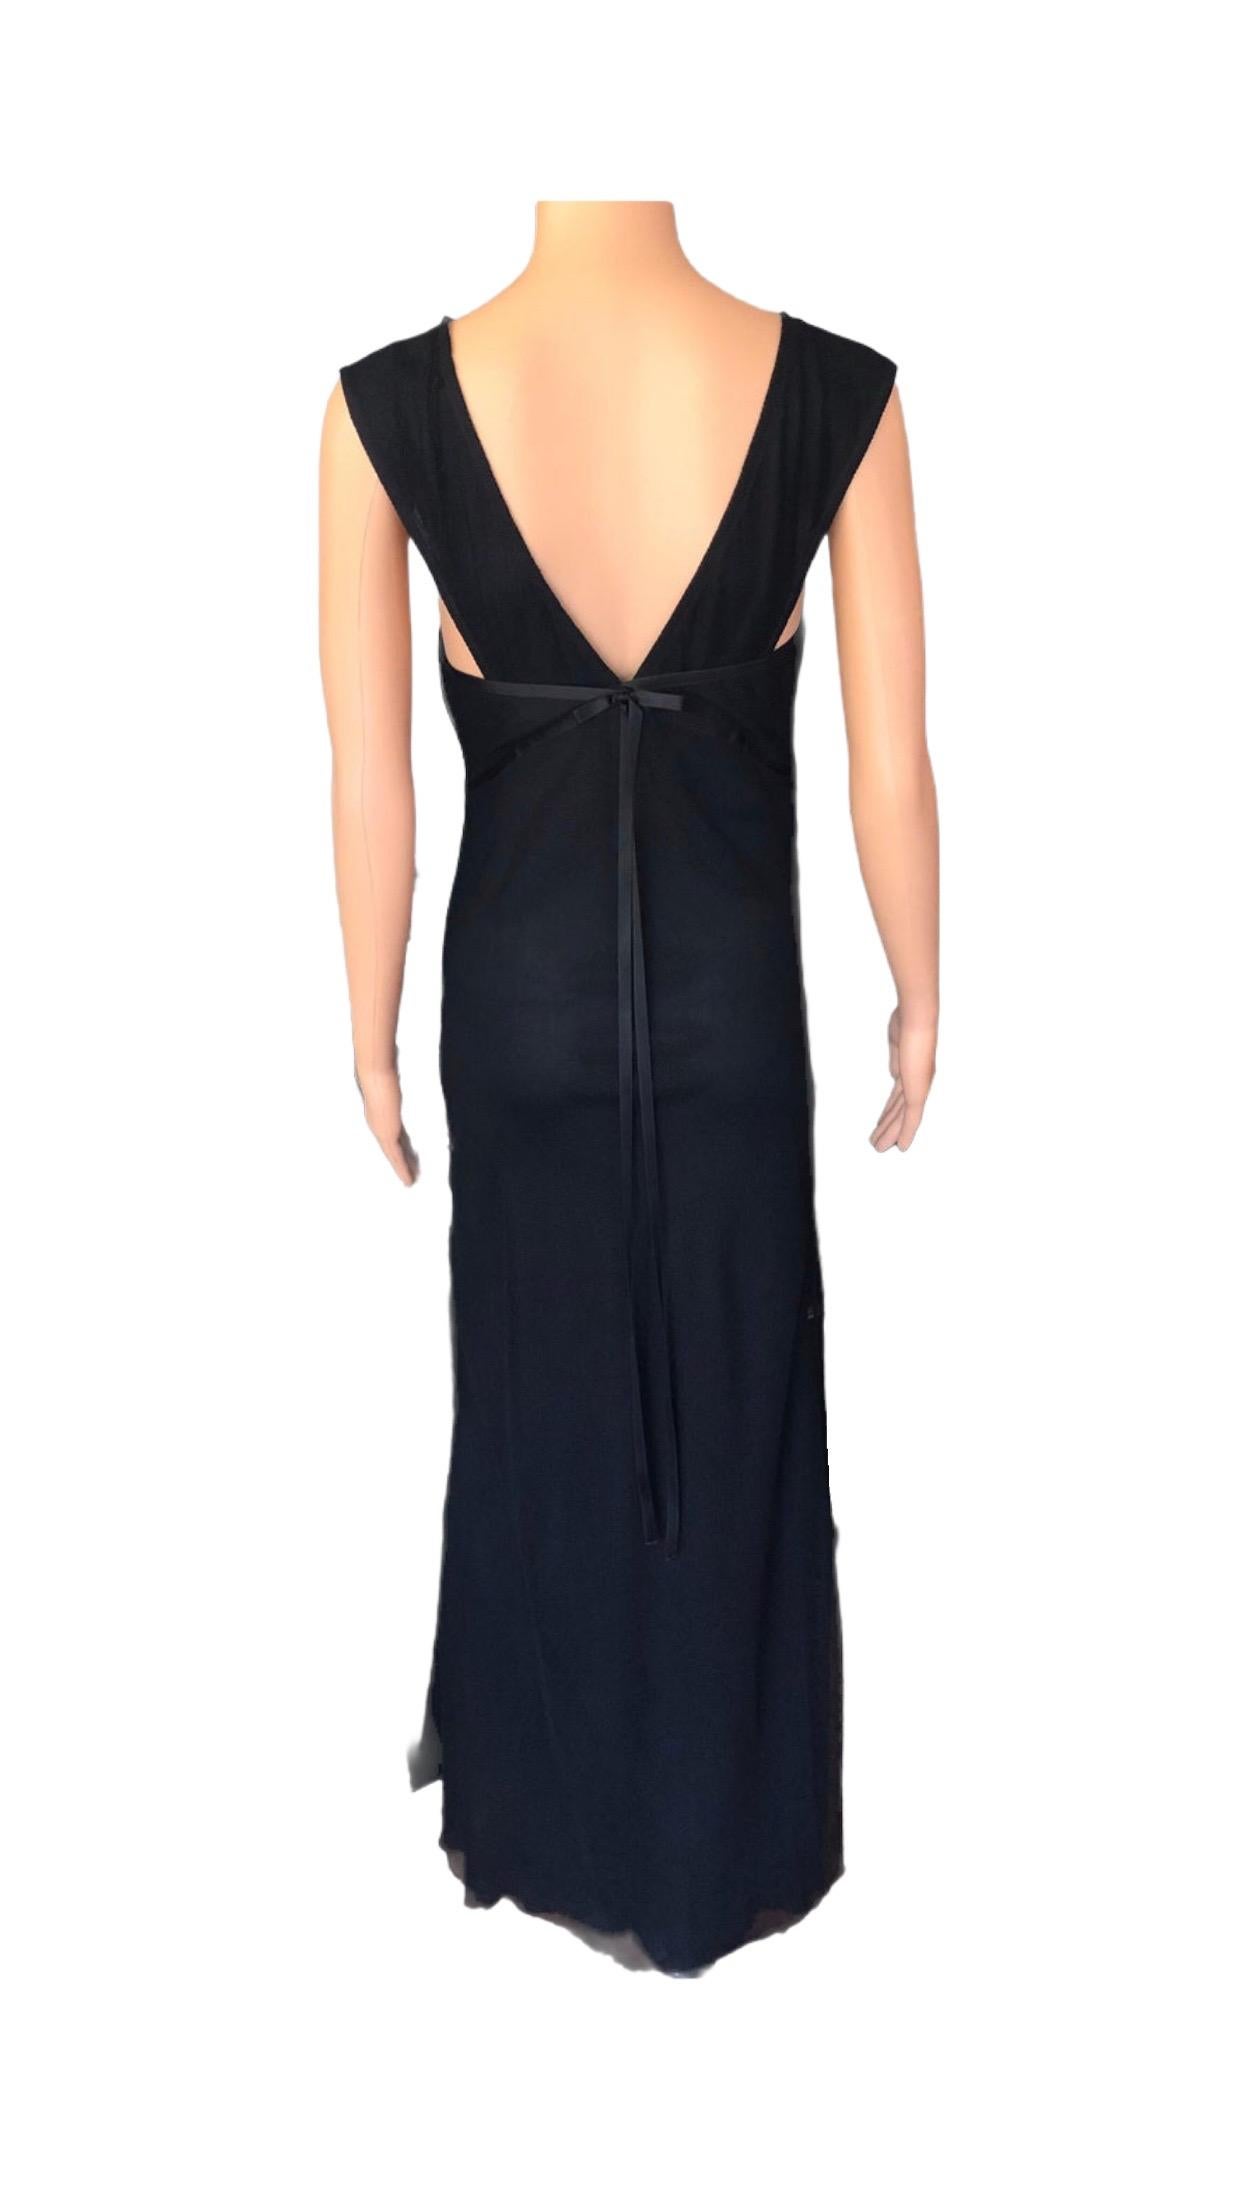 Tom Ford for Gucci F/W 2001 Plunging Draped Mesh Black Evening Dress Gown For Sale 4